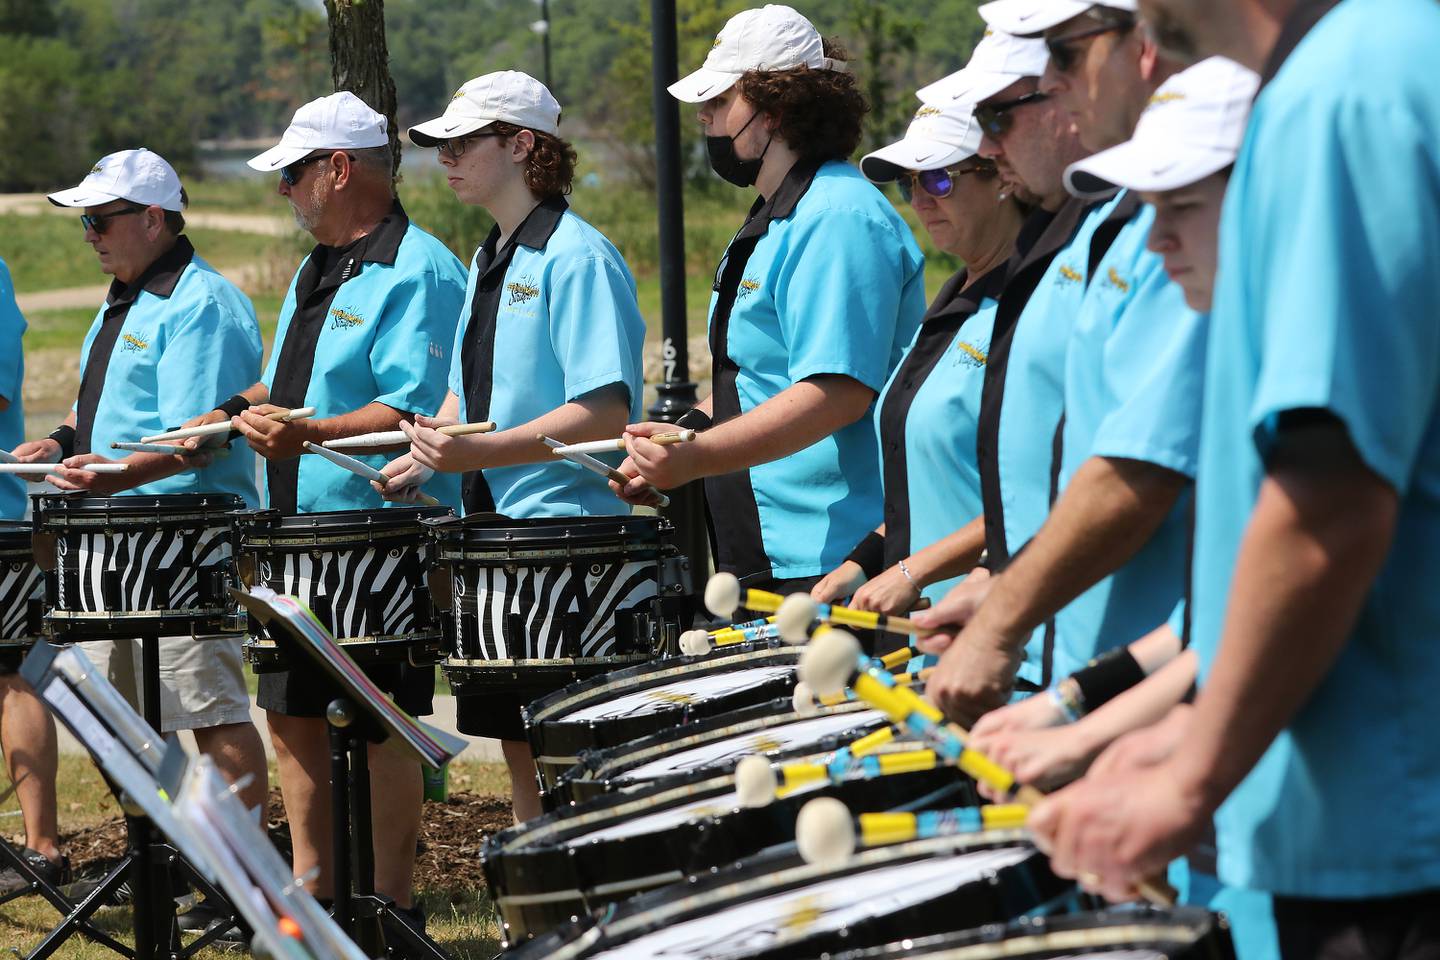 The Crystal Lake Strikers Drumline performs during a celebration of life honoring former Crystal Lake Mayor Aaron Shepley on Saturday, June 12, 2021 at Three Oaks Recreation Area  in Crystal Lake.